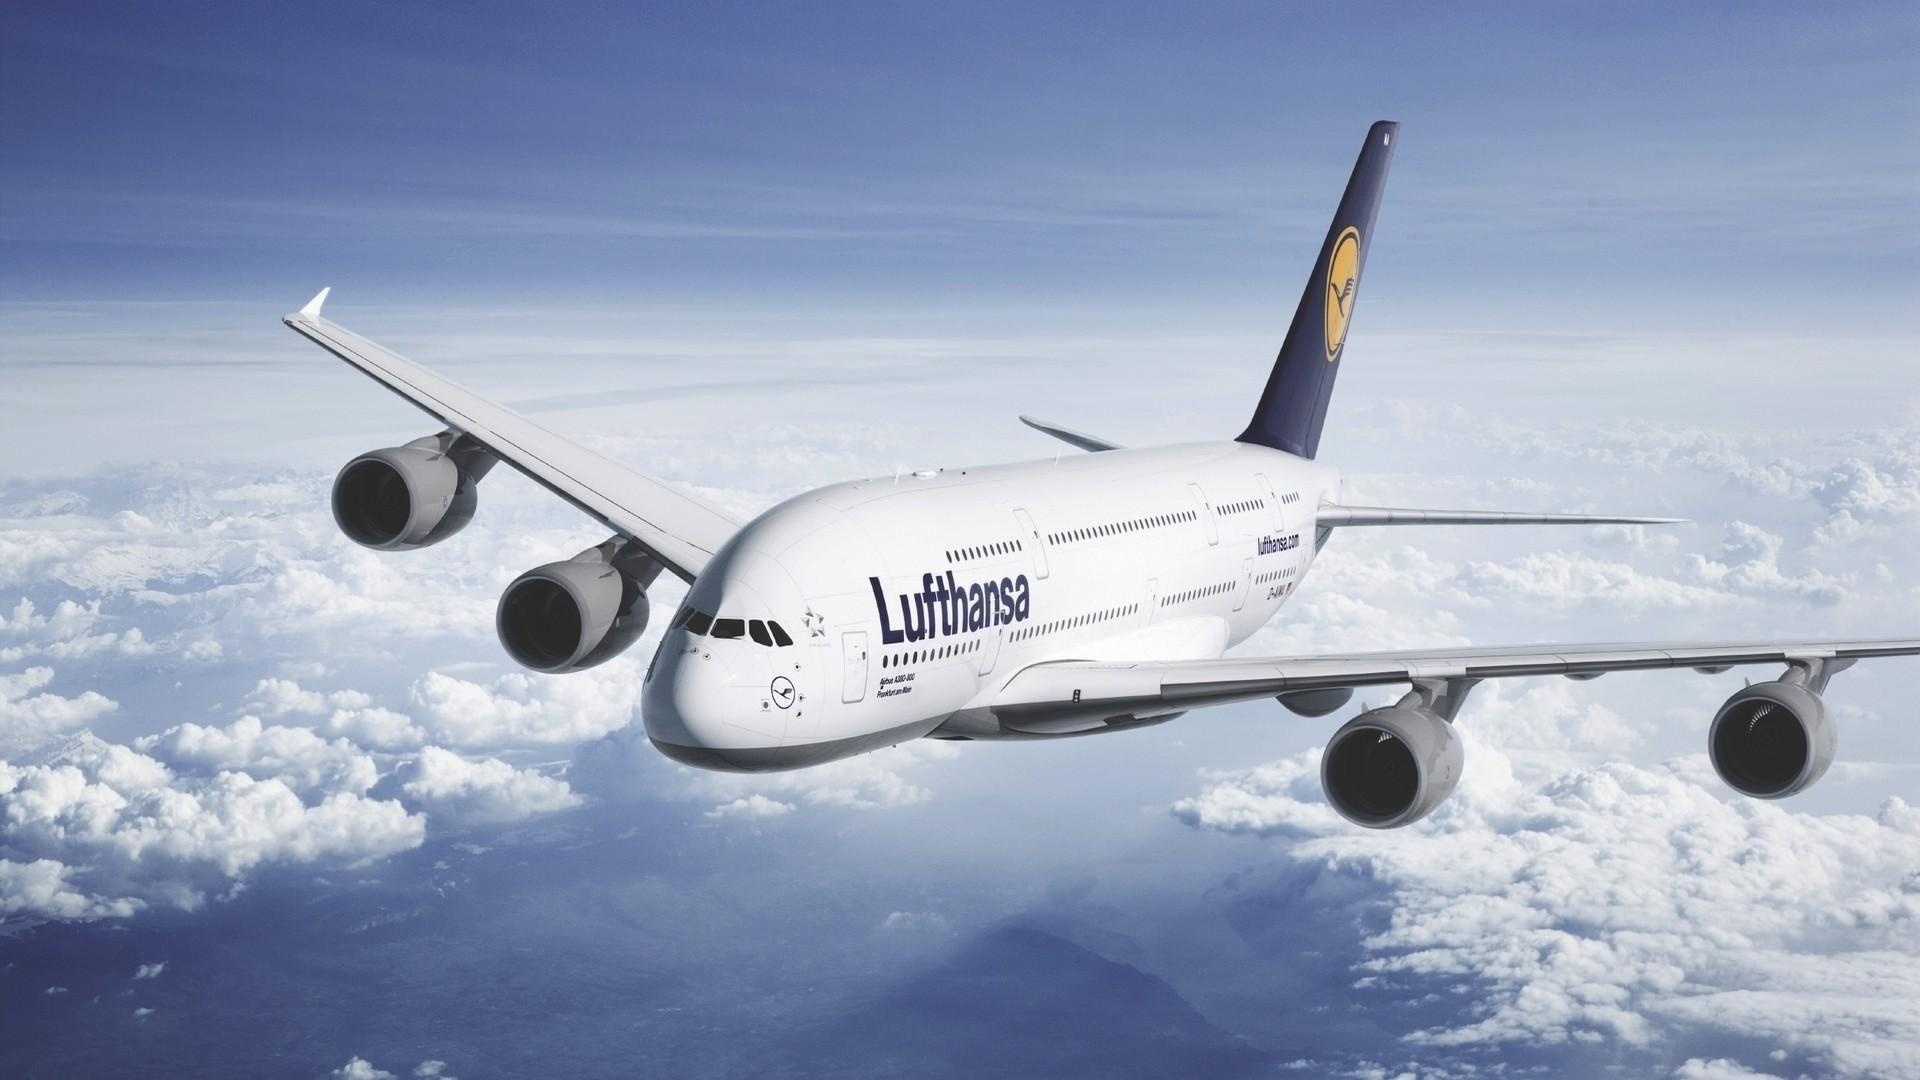 Lufthansa, High-definition visuals, Airline excellence, Travel experience, 1920x1080 Full HD Desktop